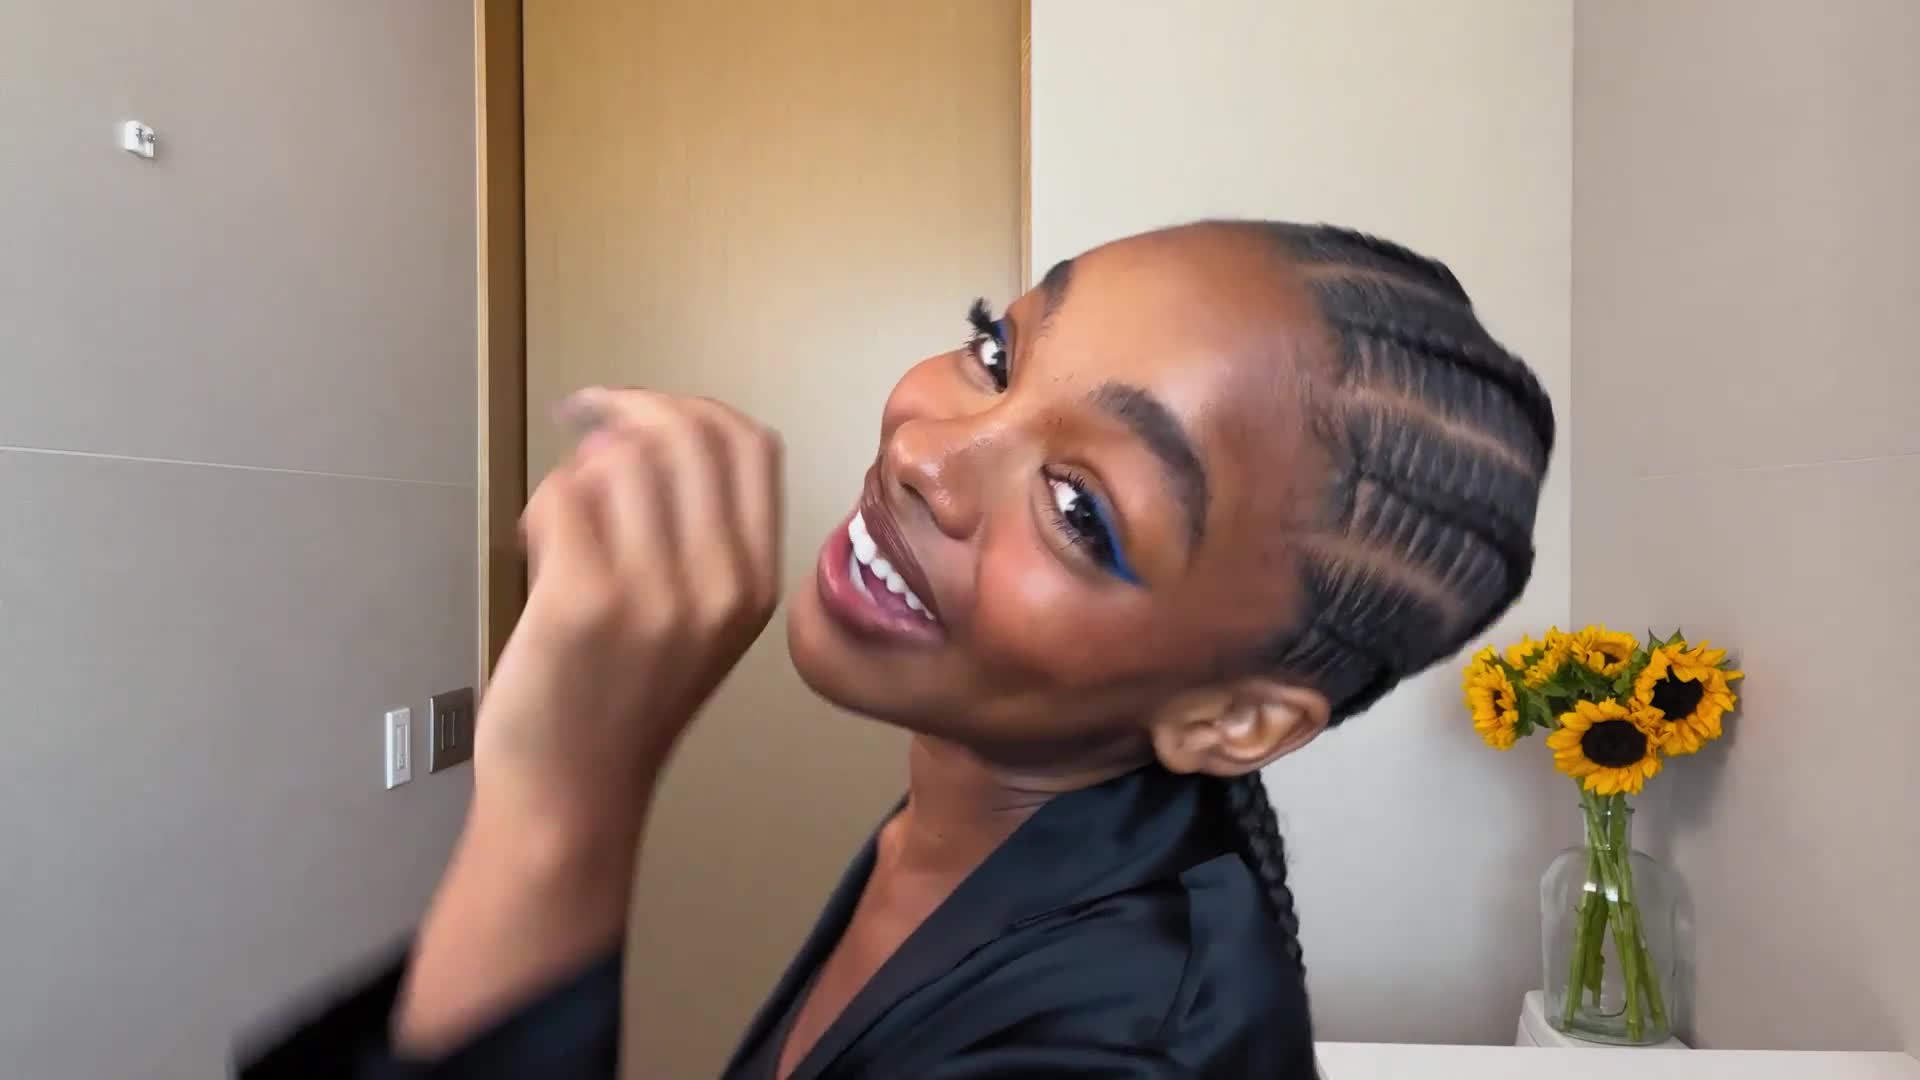 Tati Gabrielle's Best Hairstyle Moments: Pixie Cuts, Braids, & More